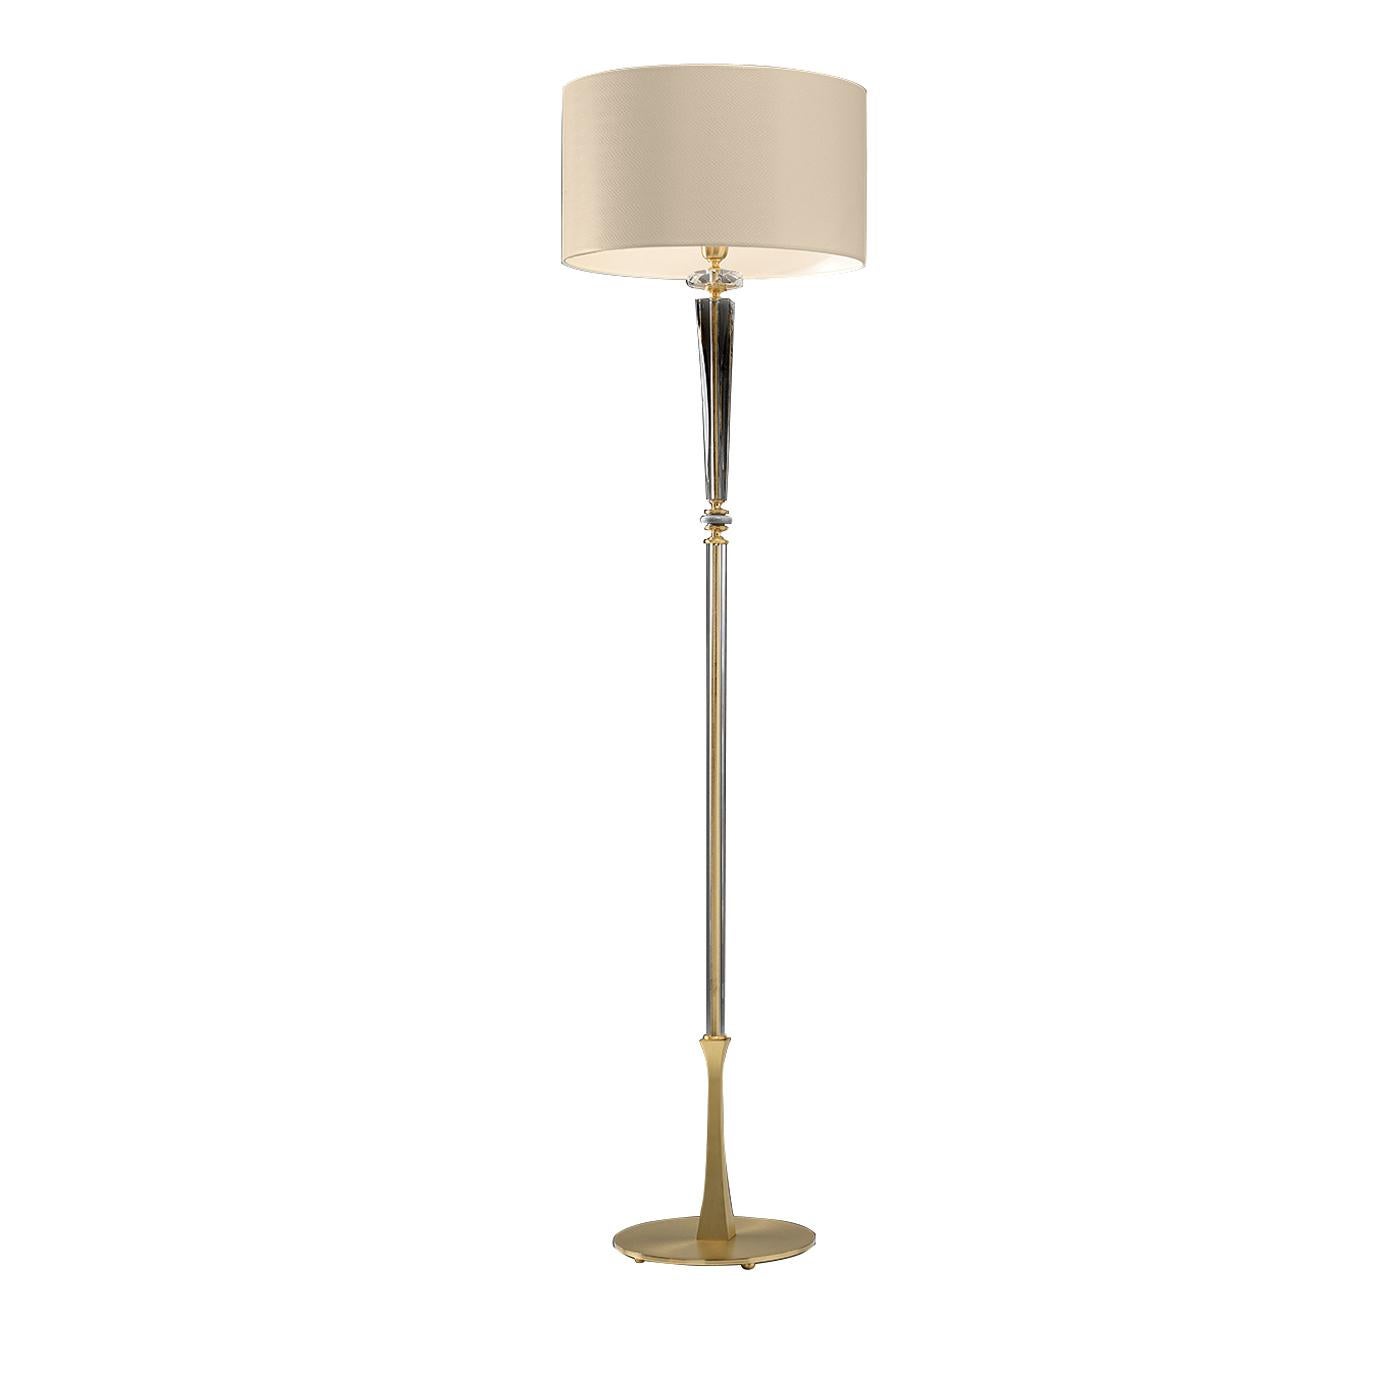 Simple yet elegant, this floor lamp designed by Euroluce Light of Italy has a slim metal body with round base in gold satin finish and a clear blown-glass conical element with golden details that deliver classic sophistication. The neutral drum